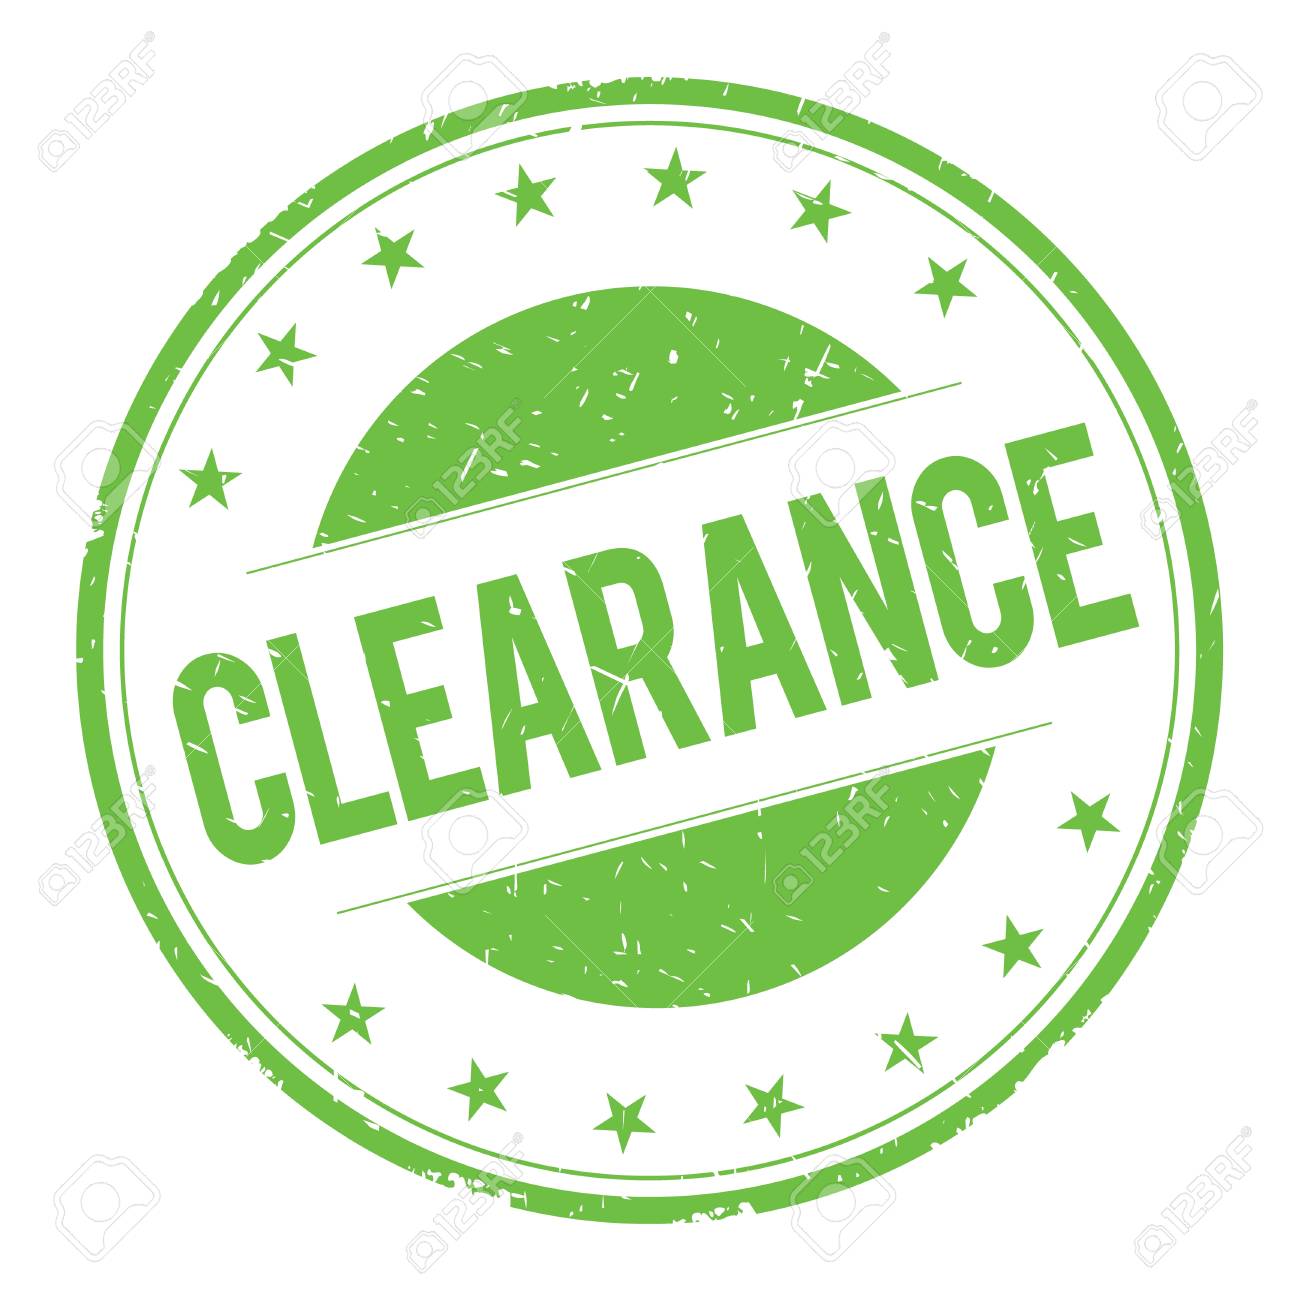 CLEARANCE stamp sign